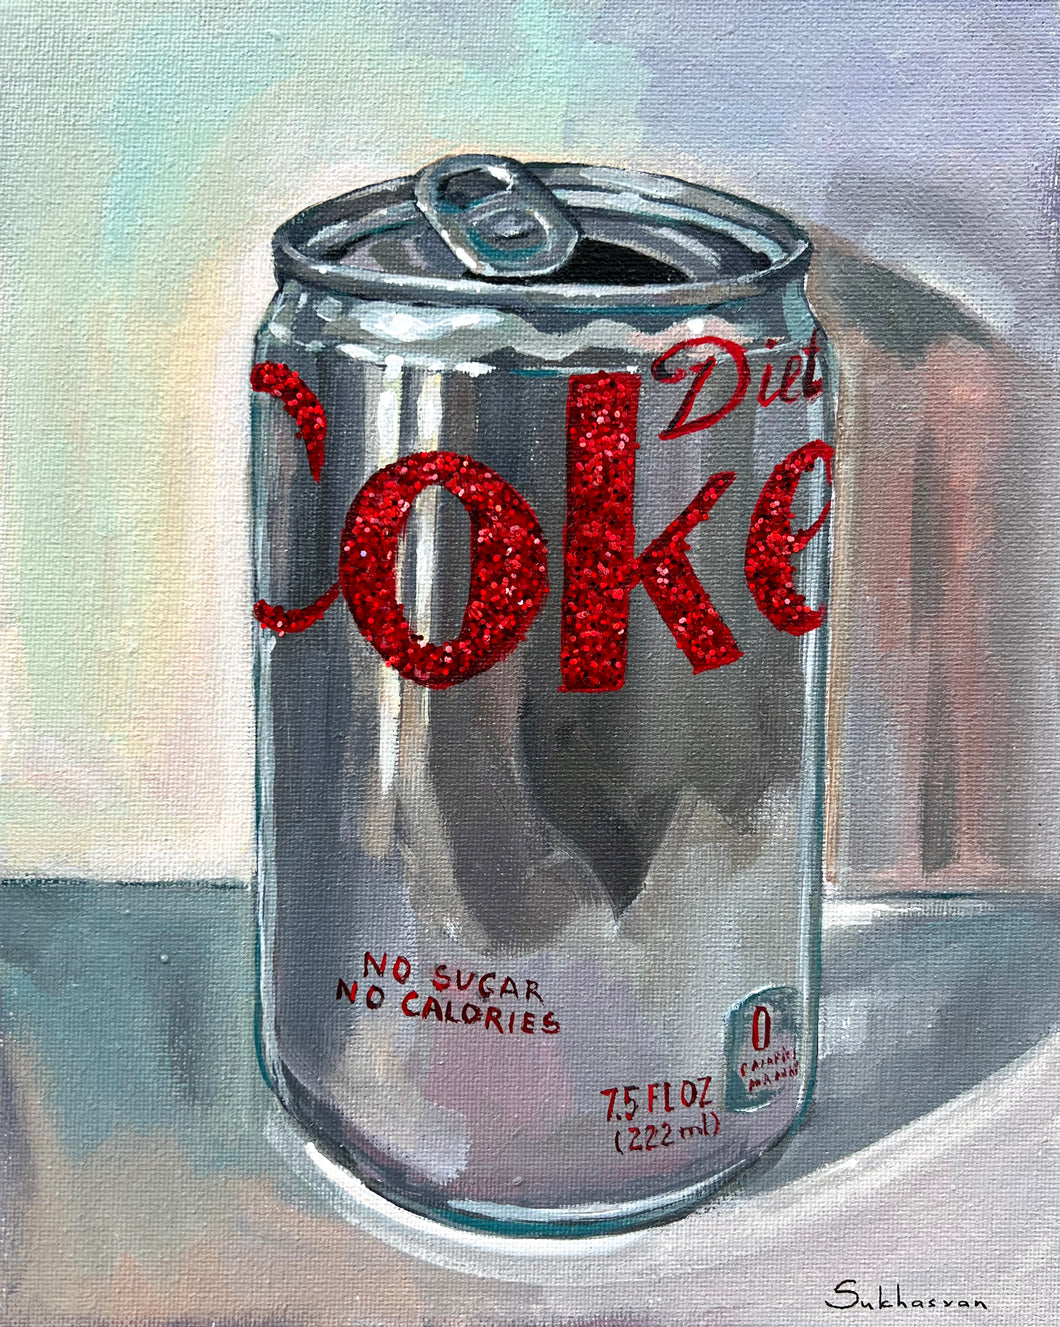 Still Life with Diet Coke